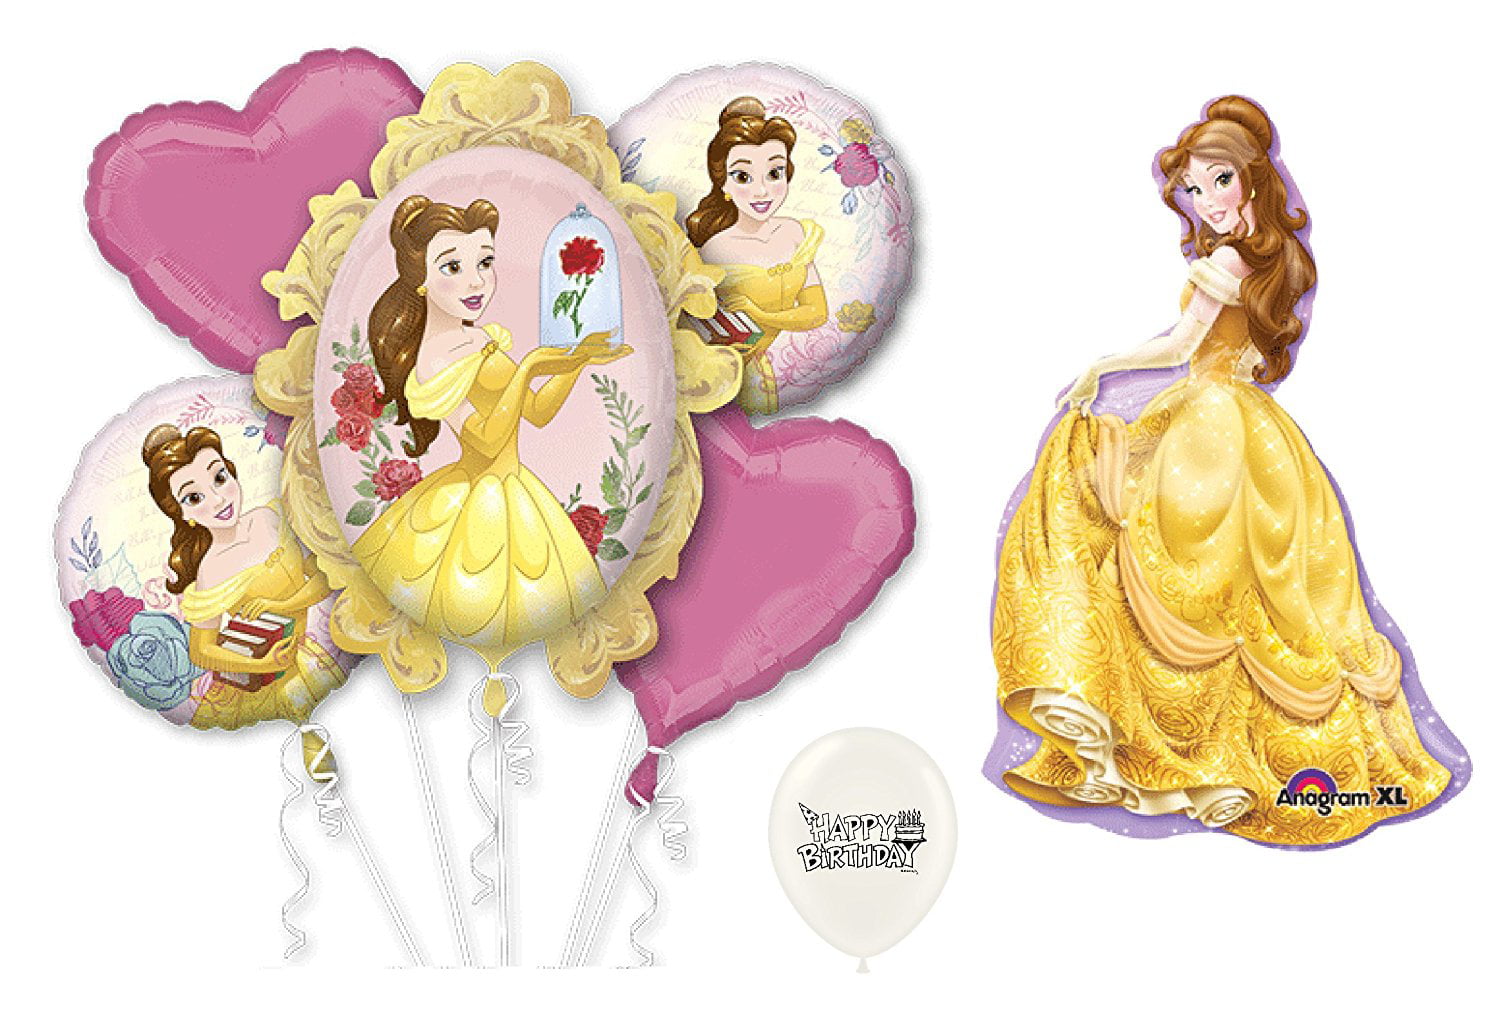 Disney Princess Belle Birthday Balloons Beauty And The Beast Party Decorations